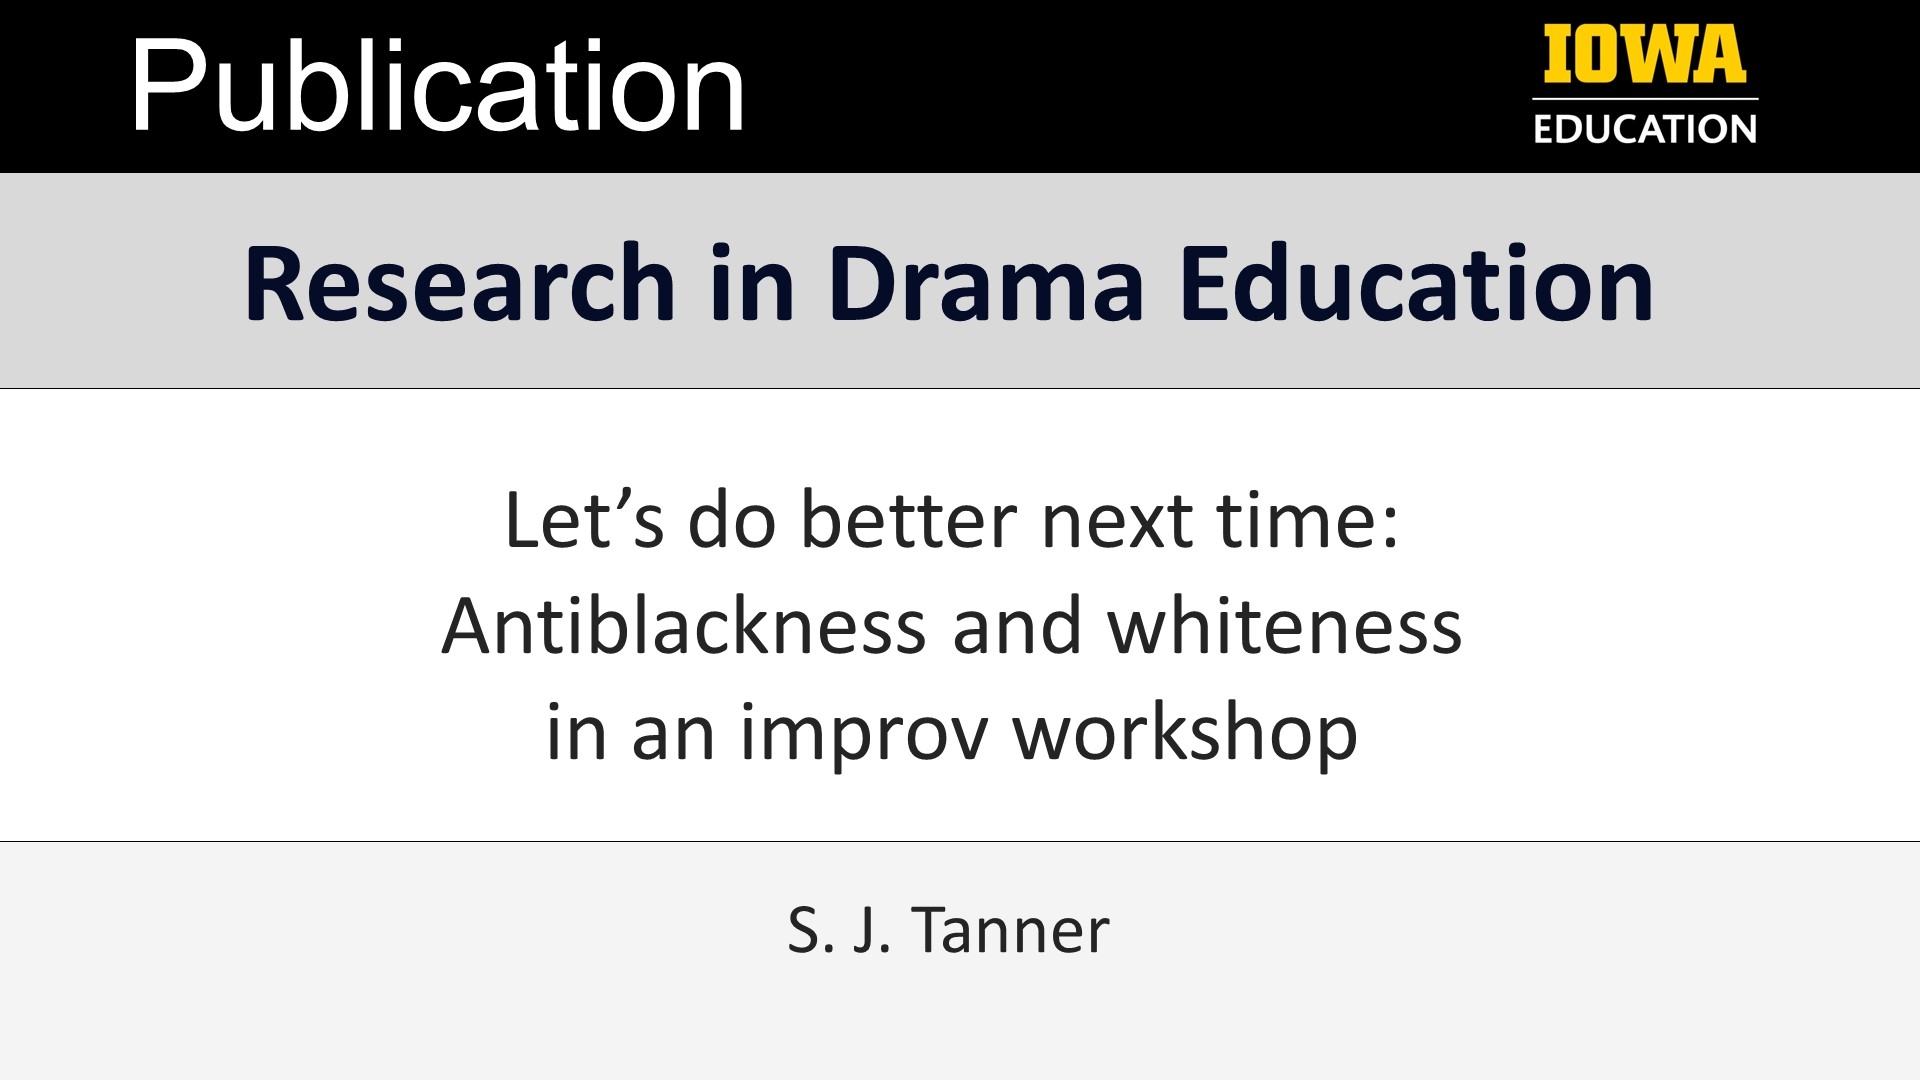 Publication: Let’s do better next time: Antiblackness and whiteness in an improv workshop. In Research in Drama Education